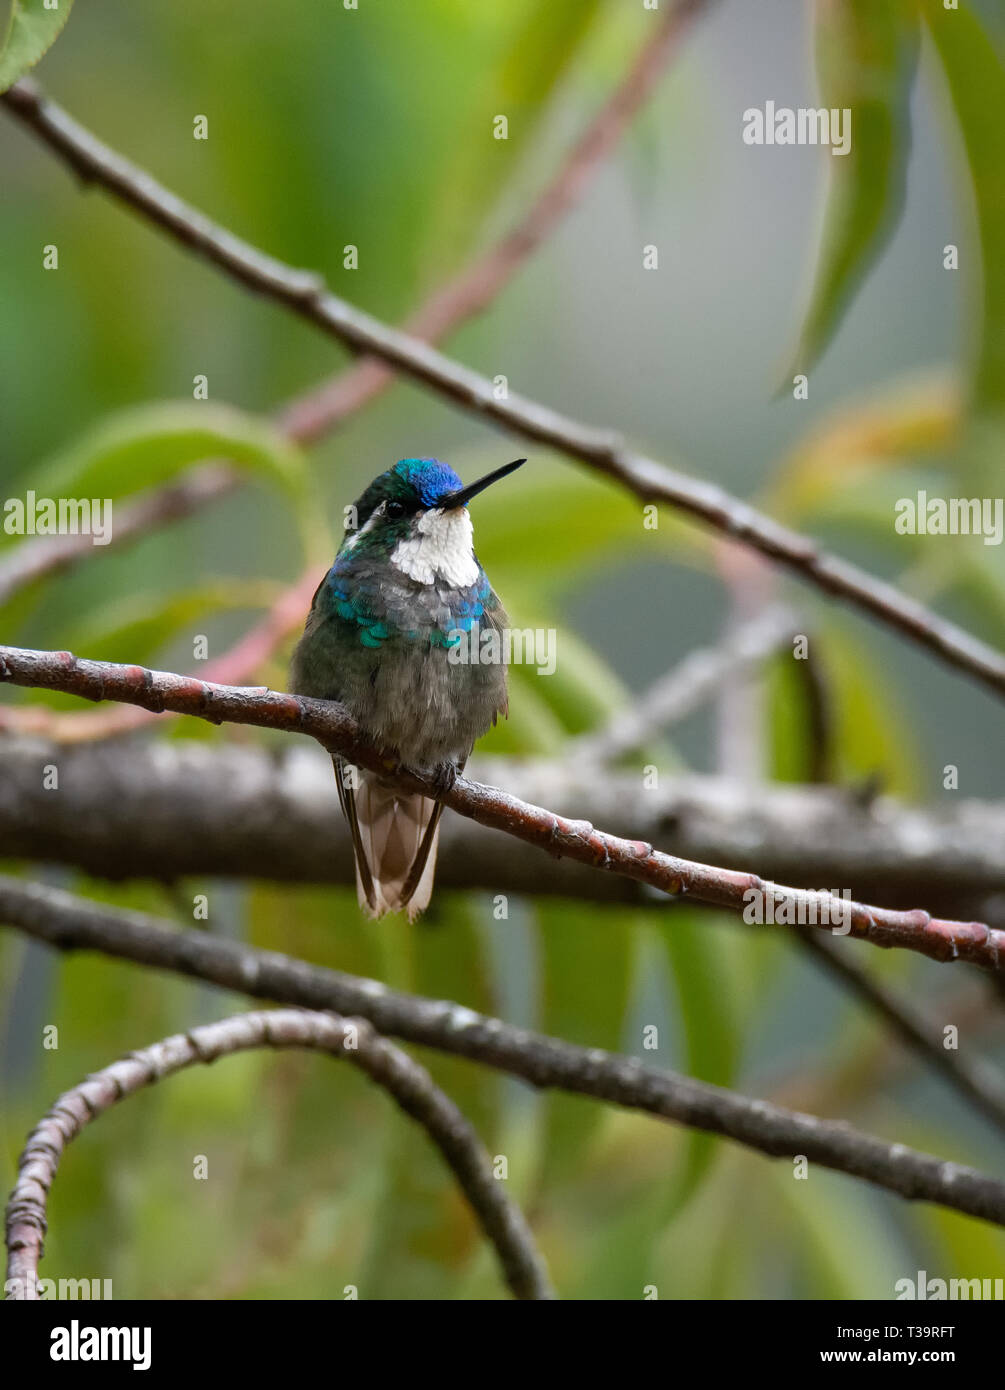 With beak upraised a White-throated Mountain-gem male hummingbird shows off the blue feathers above the beak Stock Photo